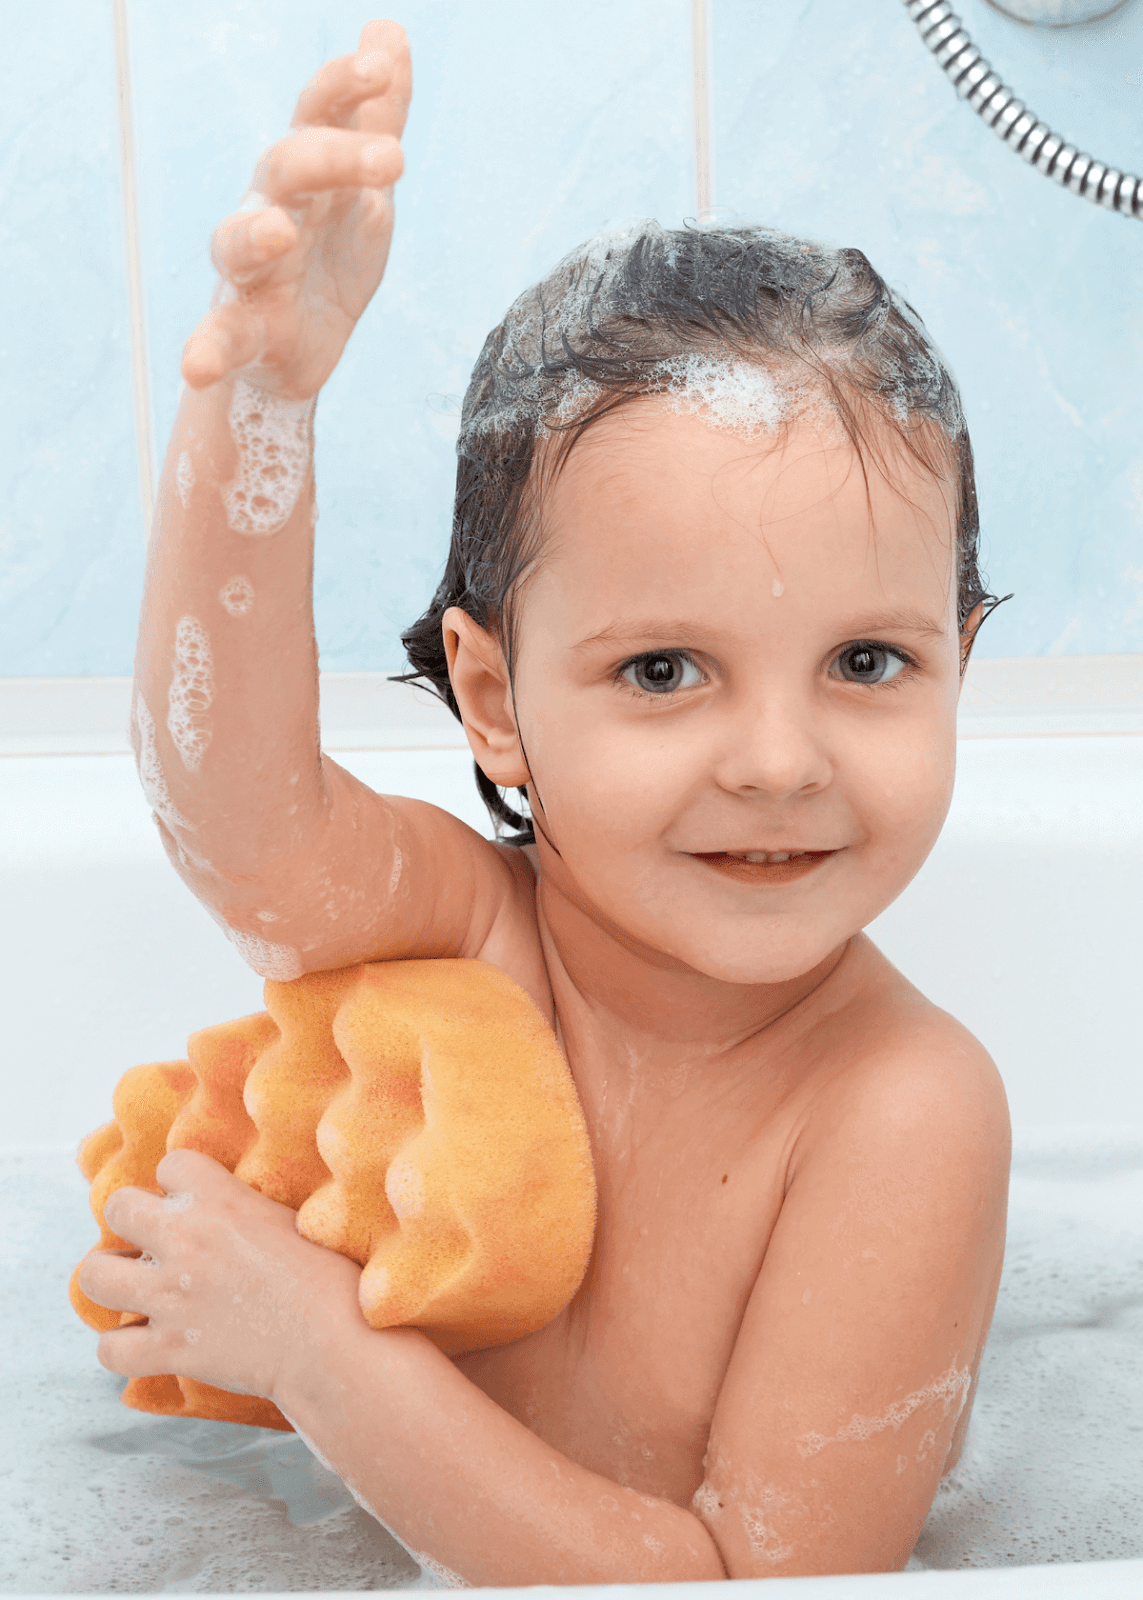 How to Choose The Right Kids Shampoo and Conditioner?